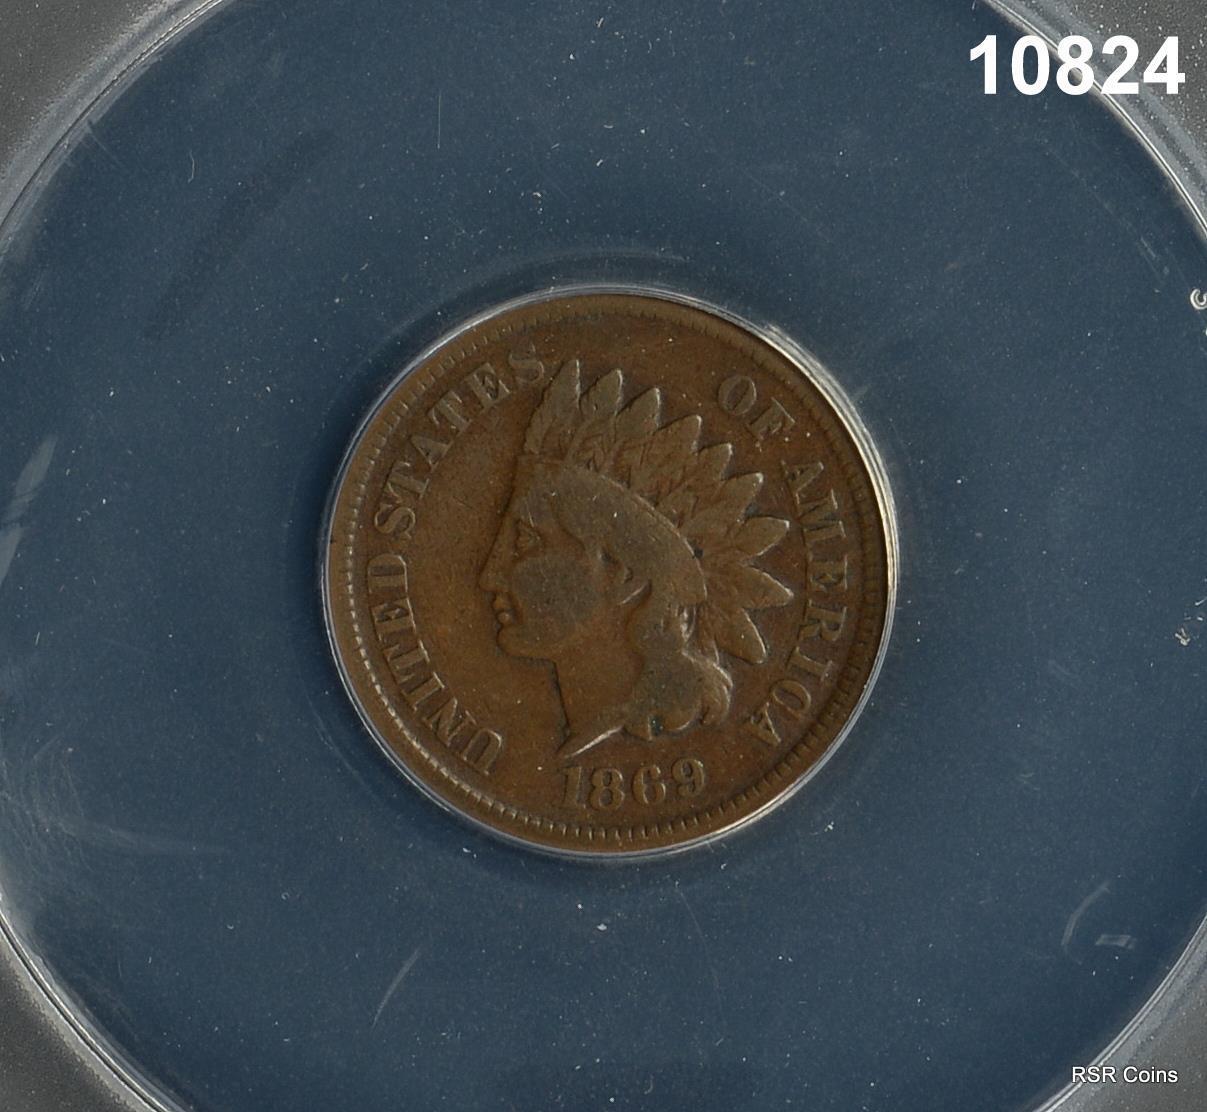 1869 INDIAN HEAD CENT ANACS CERTIFIED VG8 SCARCE DATE! #10824